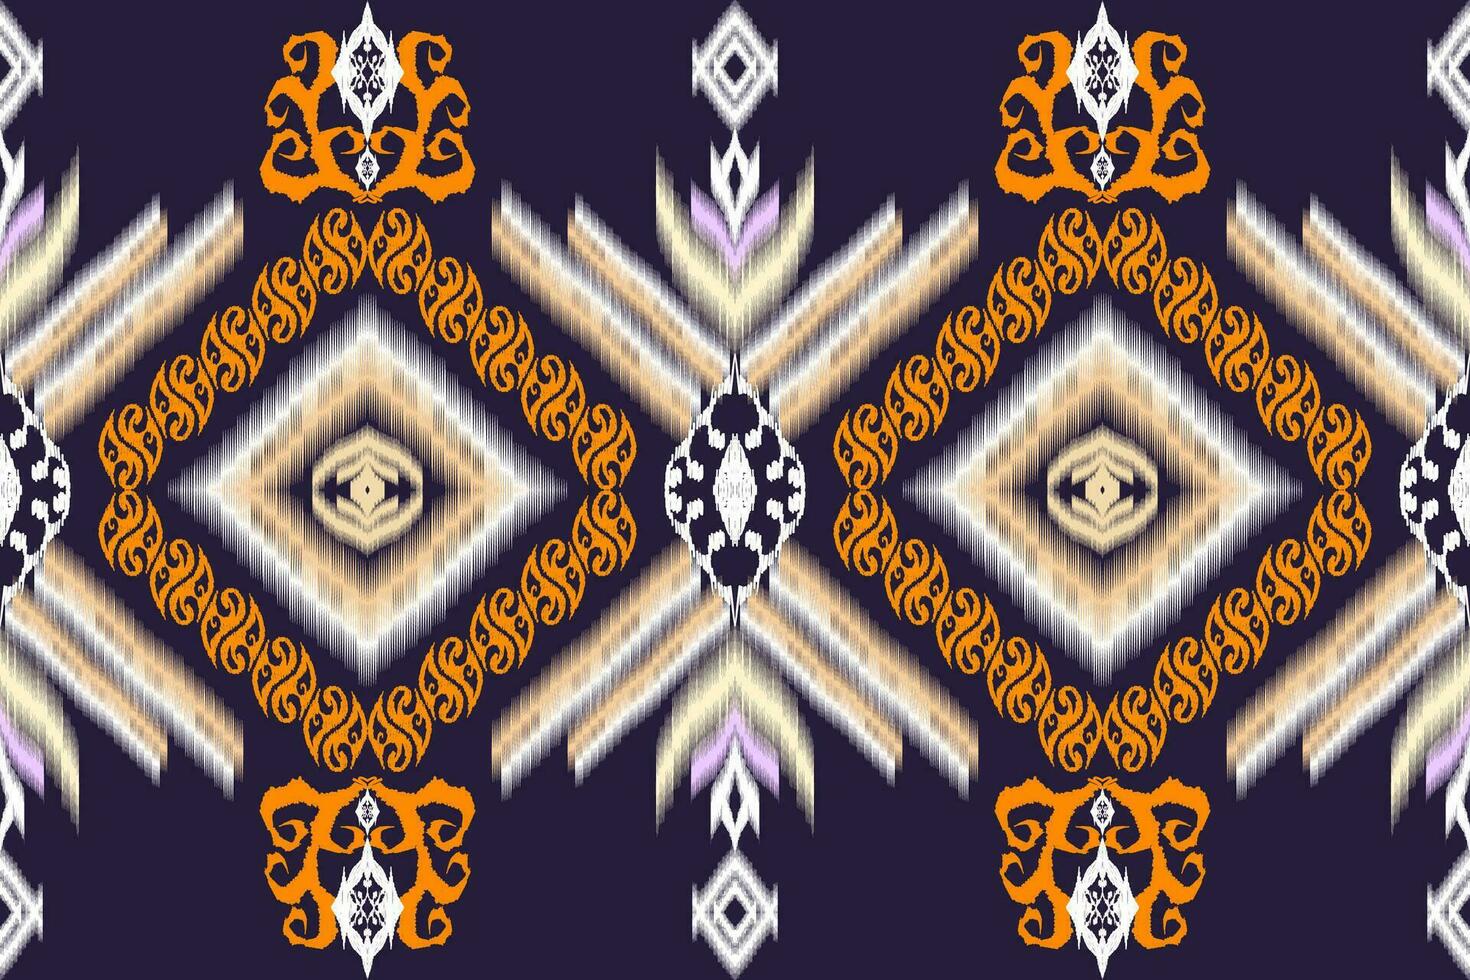 Ikat ethnic aztec embroidery style.Figure Geometric oriental traditional art pattern.Design for ikat background,wallpaper,fashion,clothing,wrapping,fabric,element,sarong,graphic,vector illustration. vector